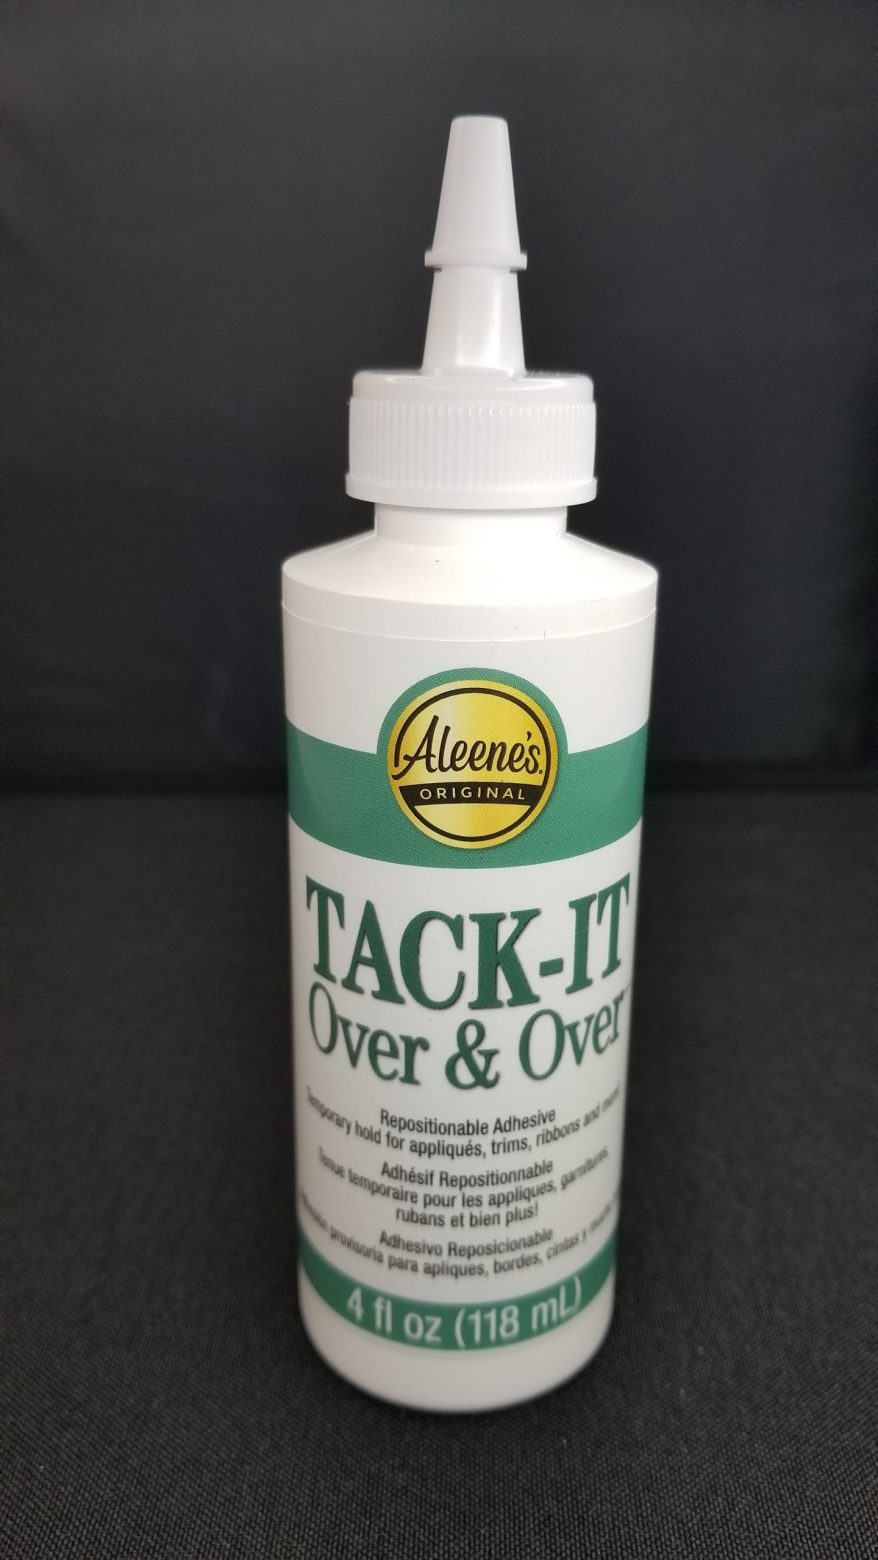 Aleene's Tack-It Over and Over Adhesive 4 fl. oz, Repositionable